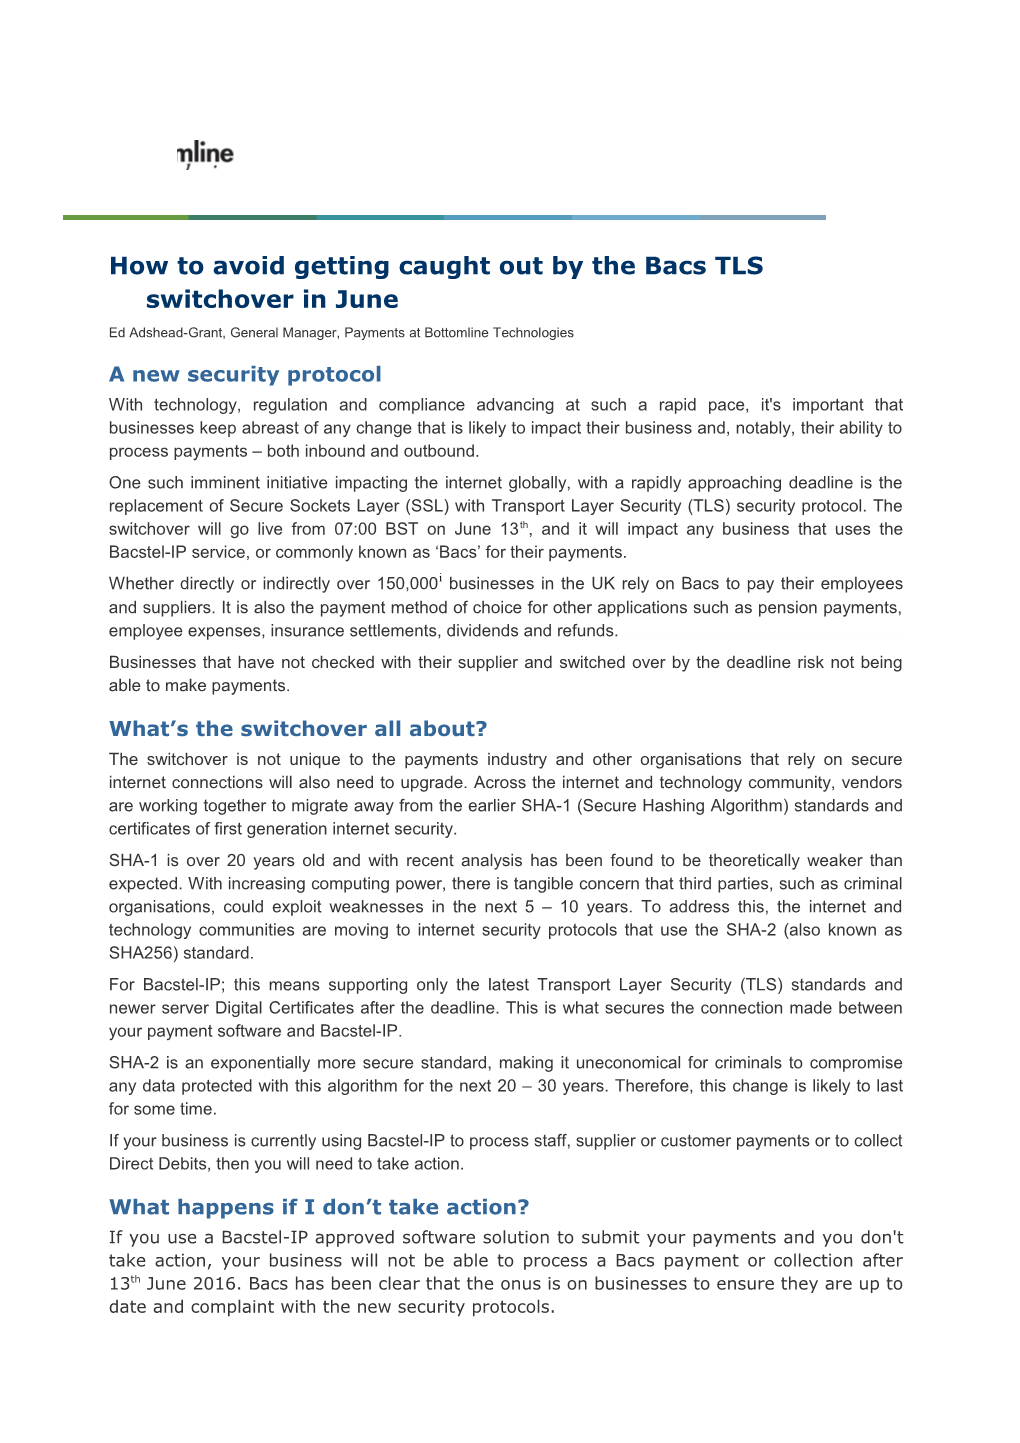 How to Avoid Getting Caught out by the Bacs TLS Switchover in June